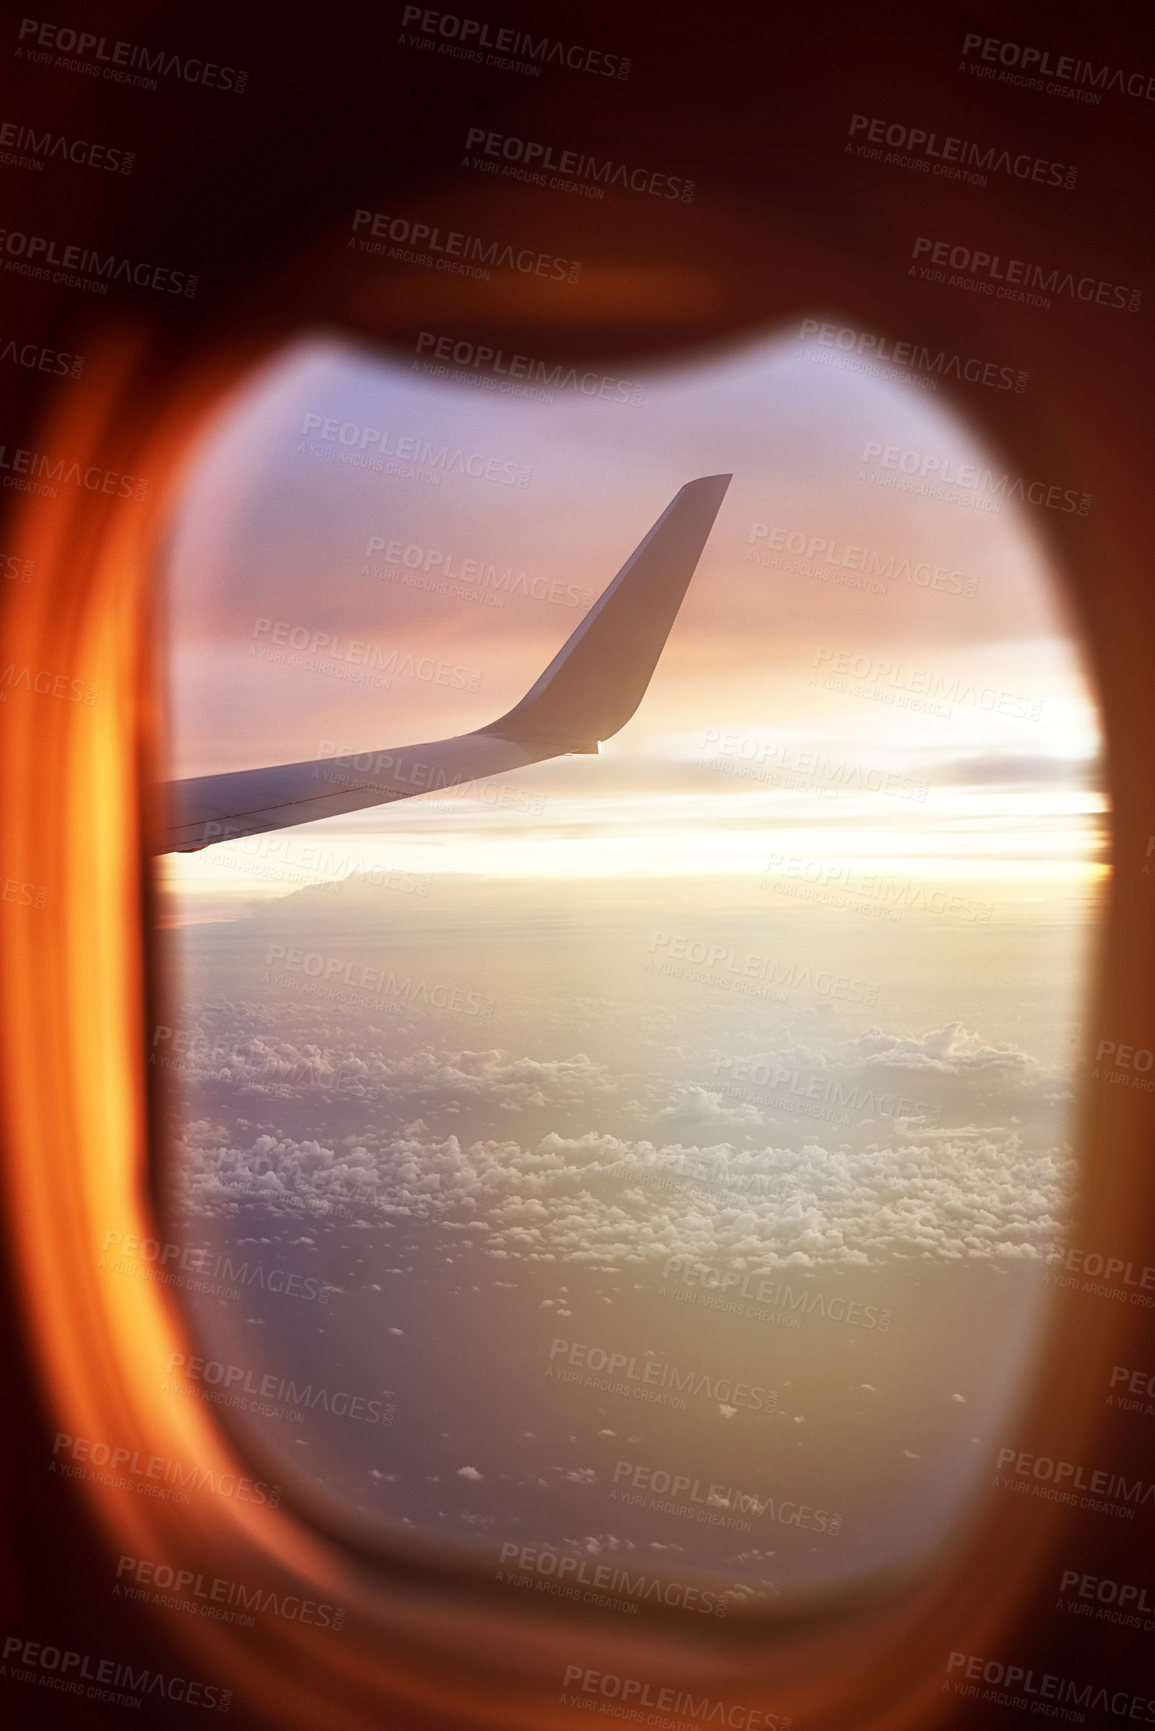 Buy stock photo Shot of the view through an airplane window